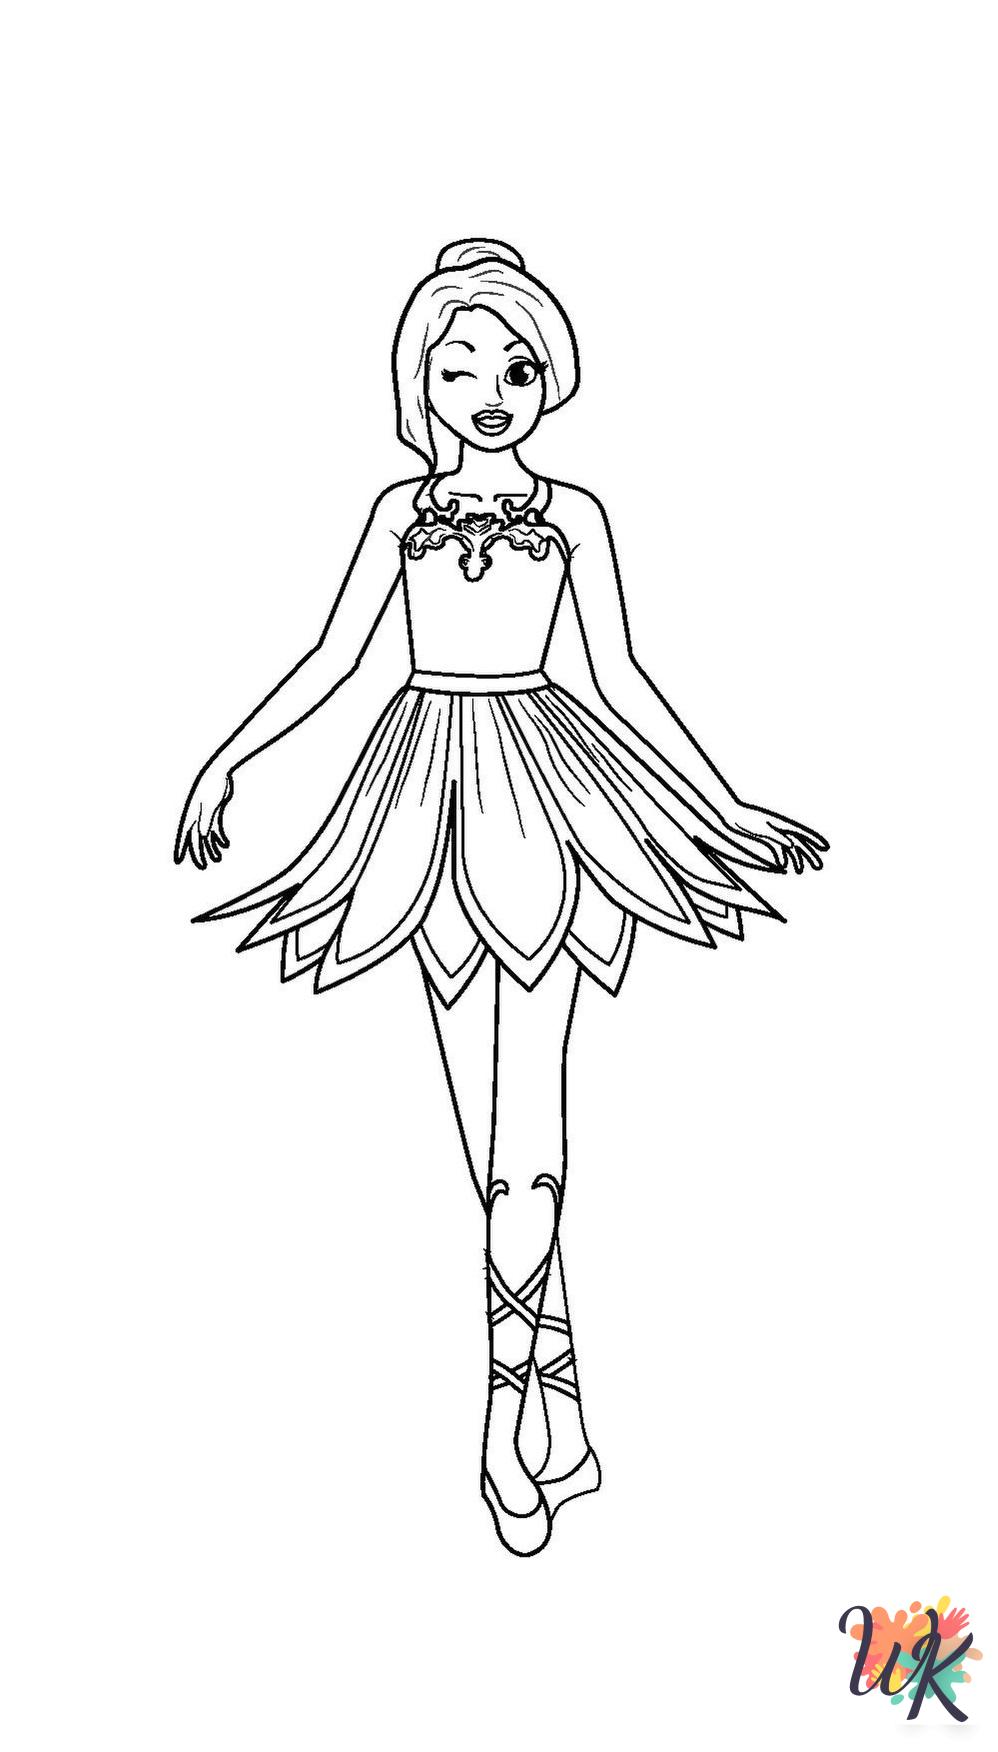 Ballerina Coloring Pages 13